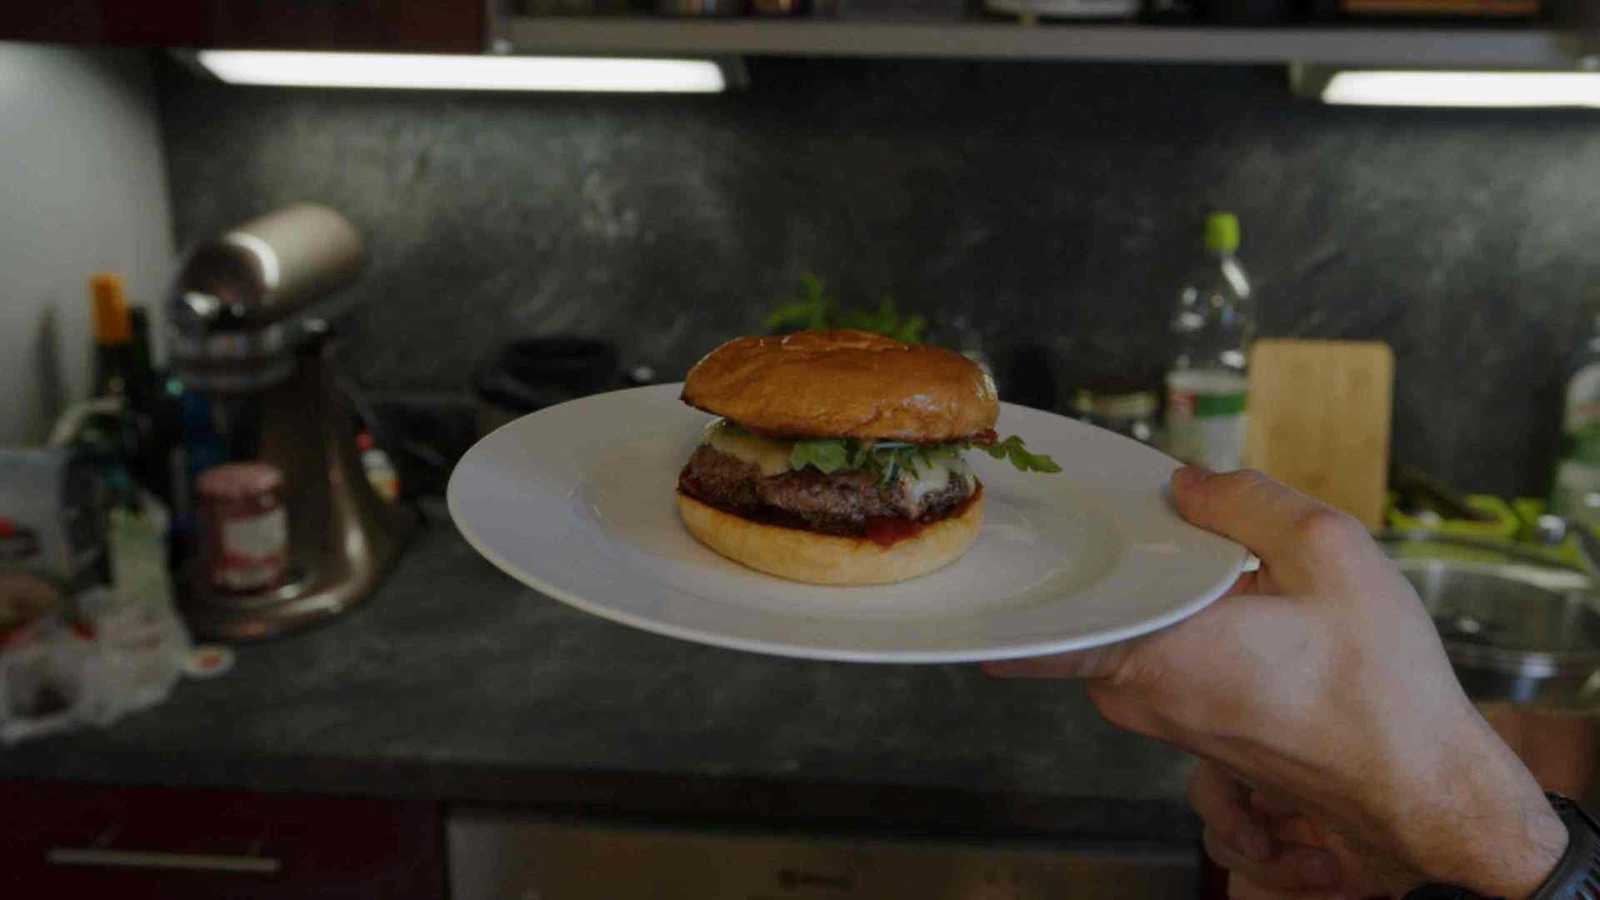 Finished burger being shown on a plate